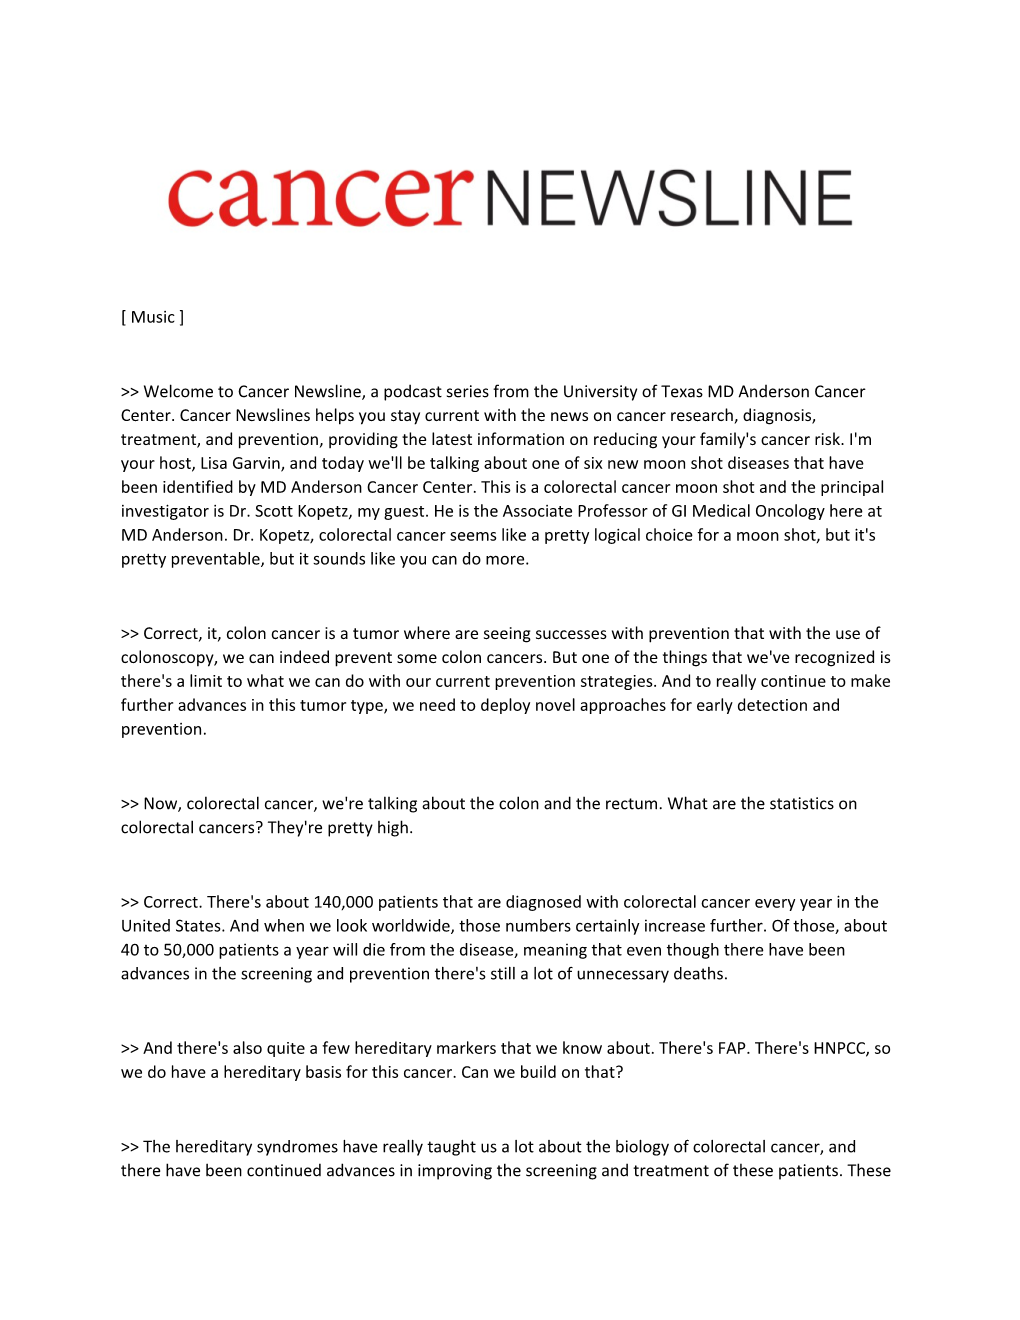 &gt; Welcome to Cancer Newsline, a Podcast Series from the University of Texas MD Anderson